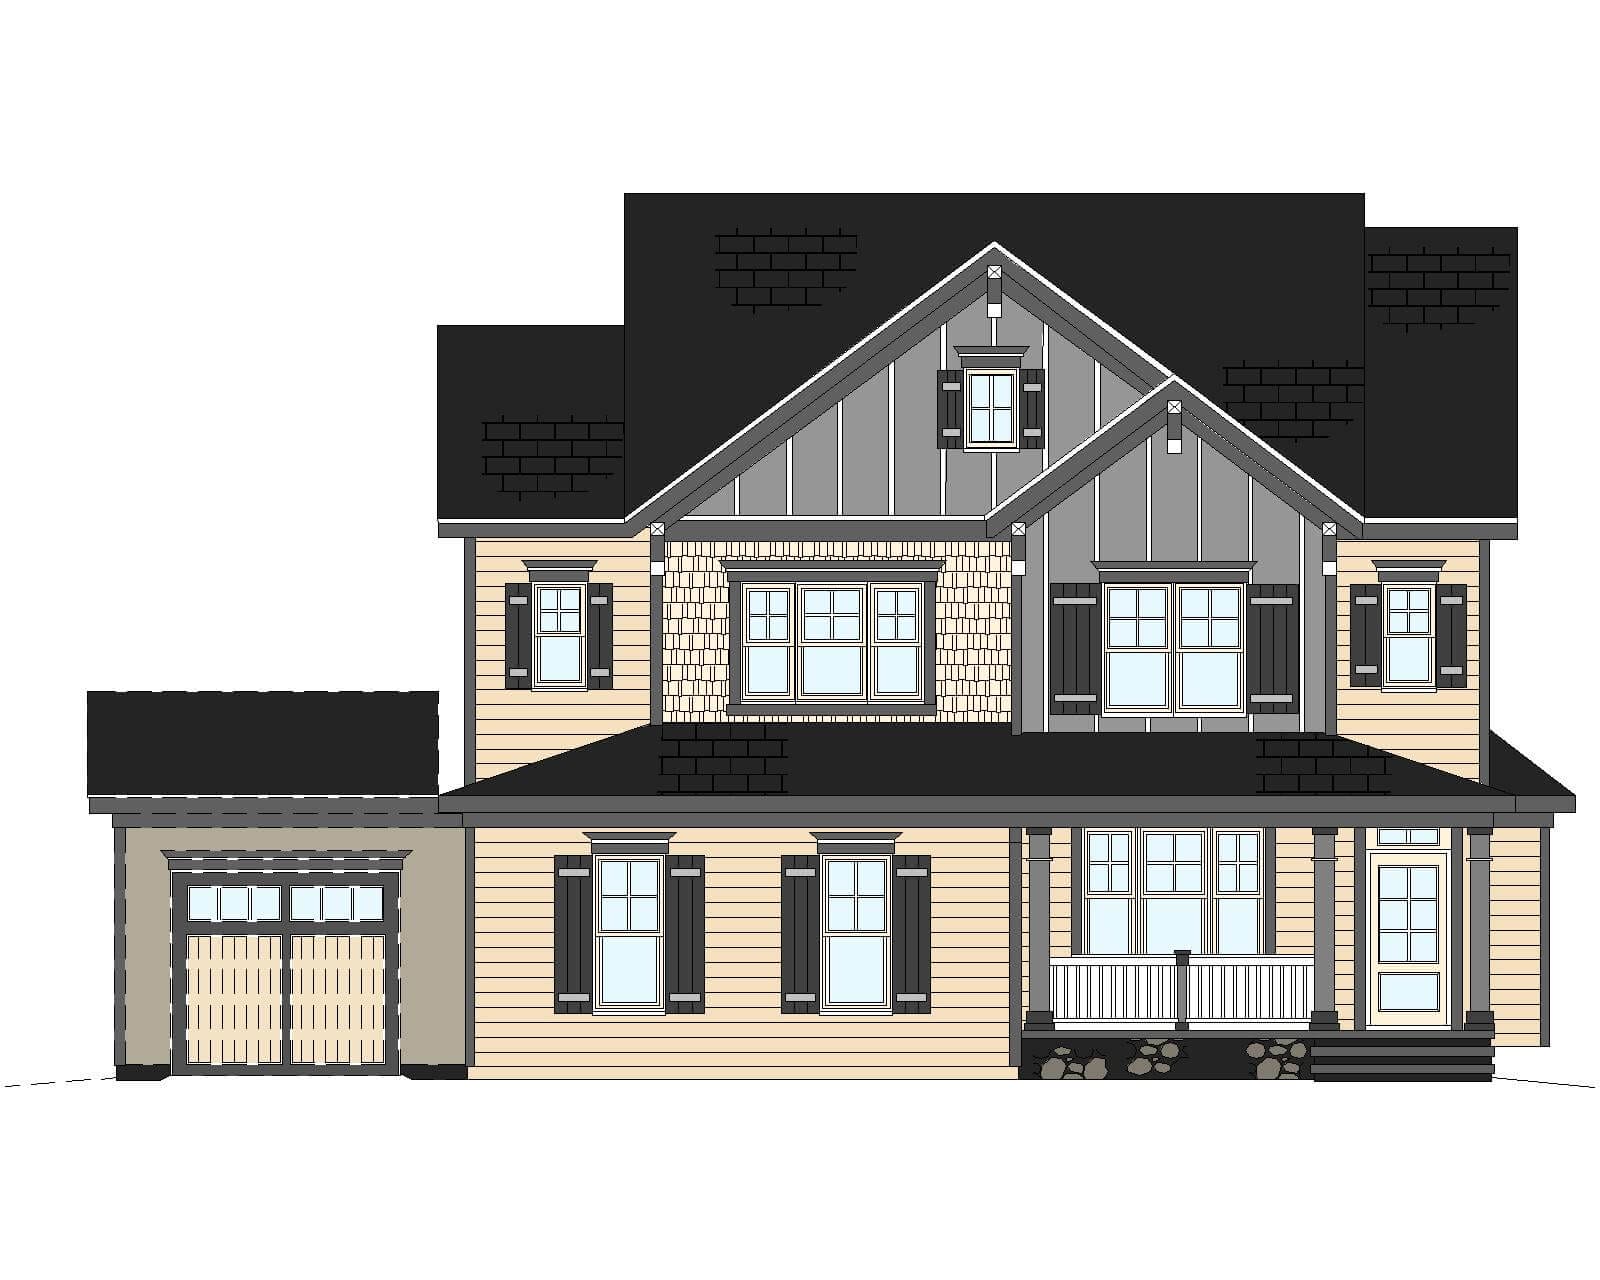 Detailed illustration of a 13-1155 featuring a mix of brick and siding, multiple gabled roofs, a covered front porch, large windows, and an attached garage on the left. The color scheme includes